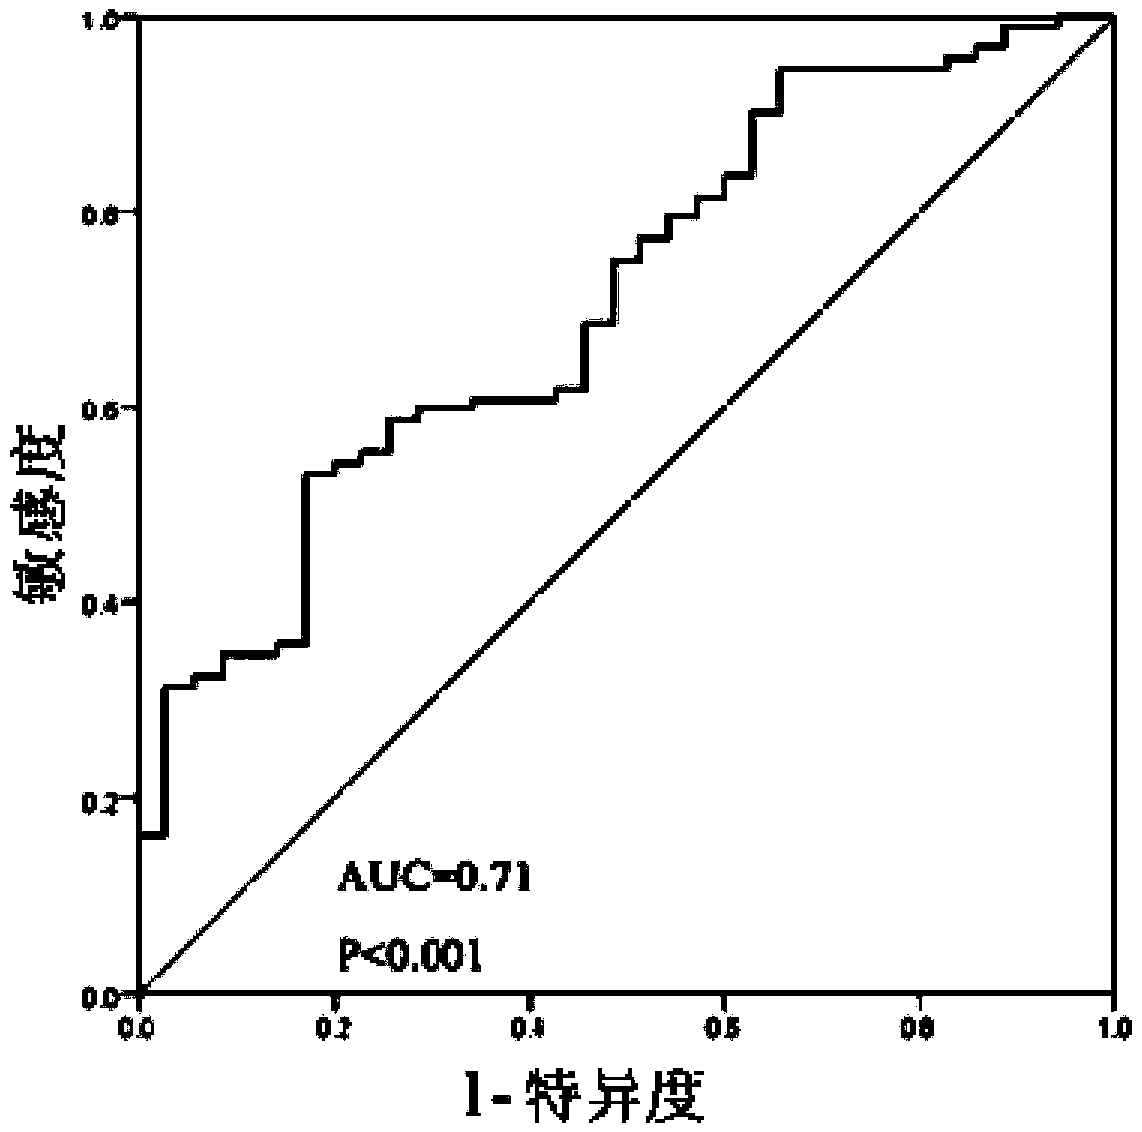 Mark used for prediction of prognosis of lung adenocarcinoma